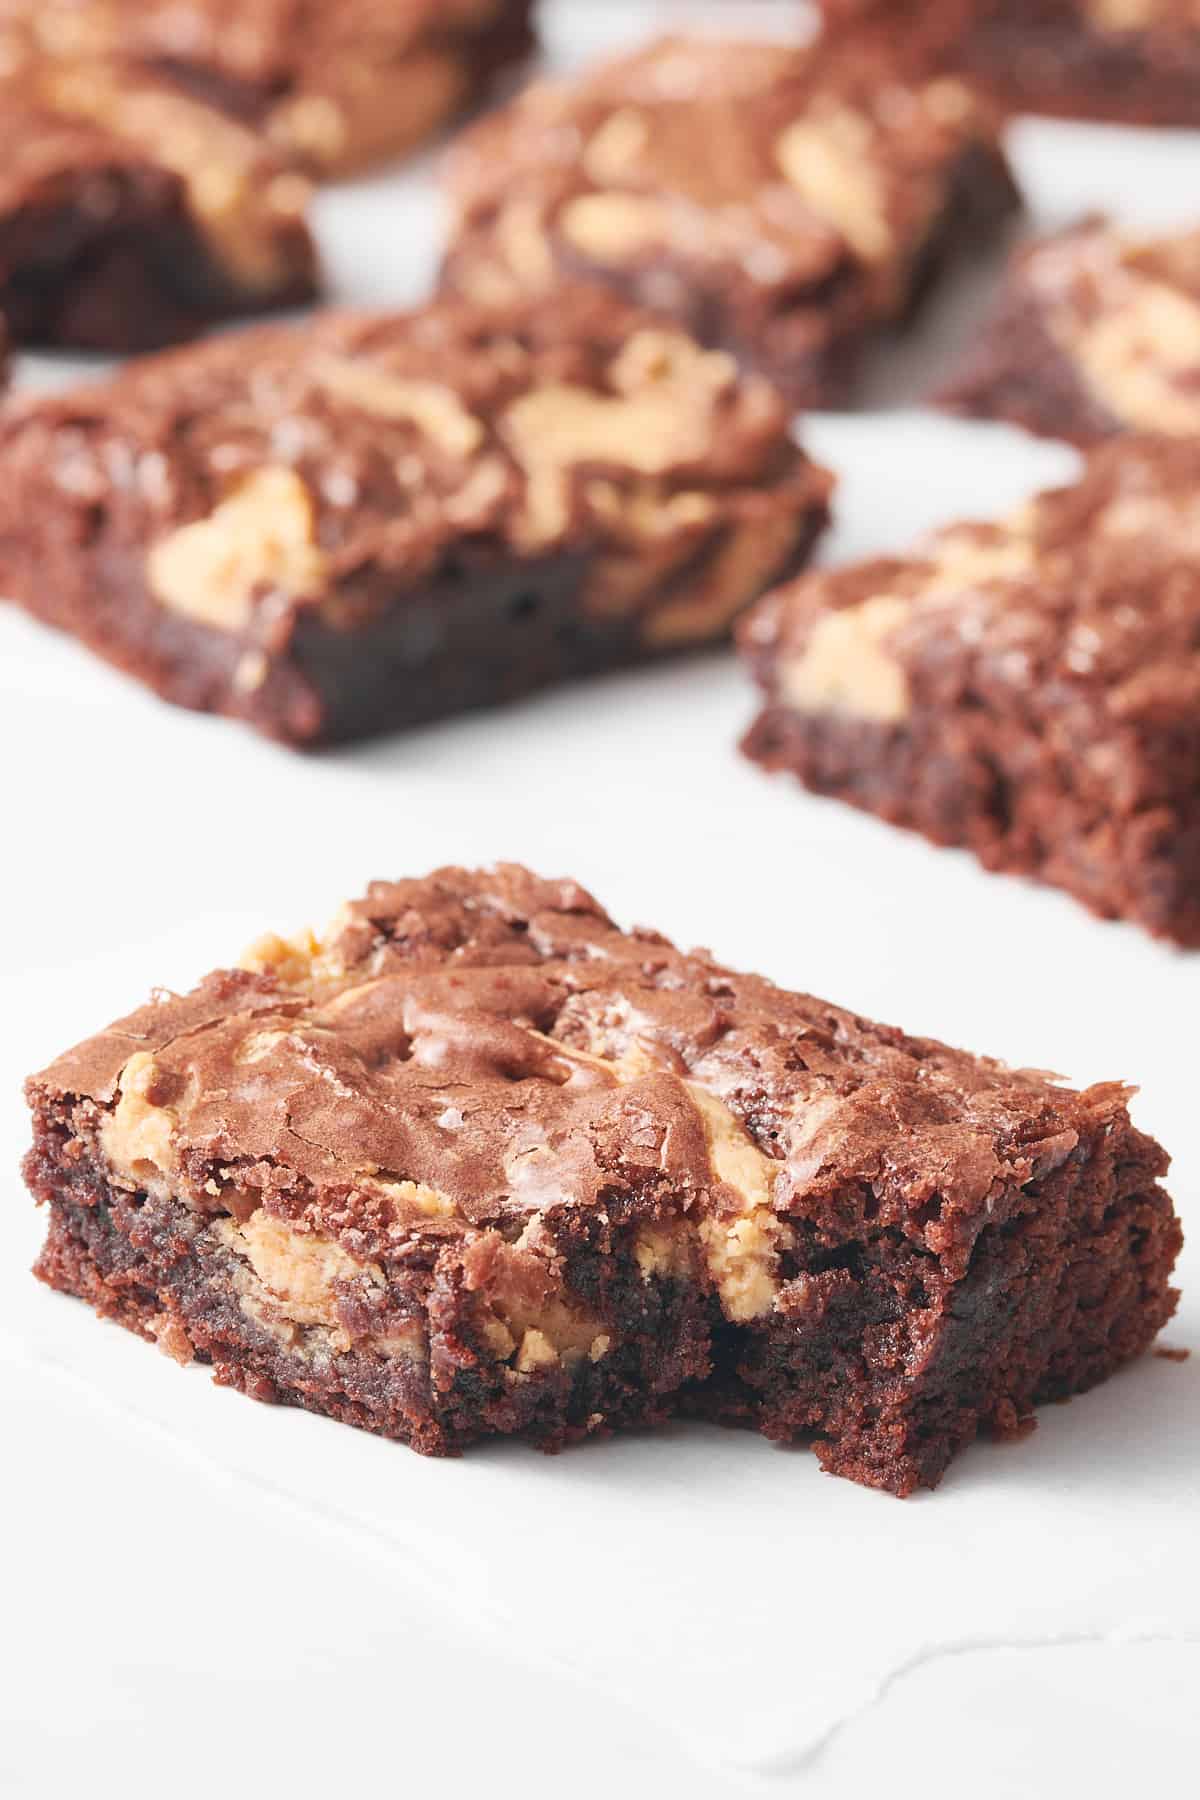 close up image of a peanut butter brownie with a bite taken out of it.